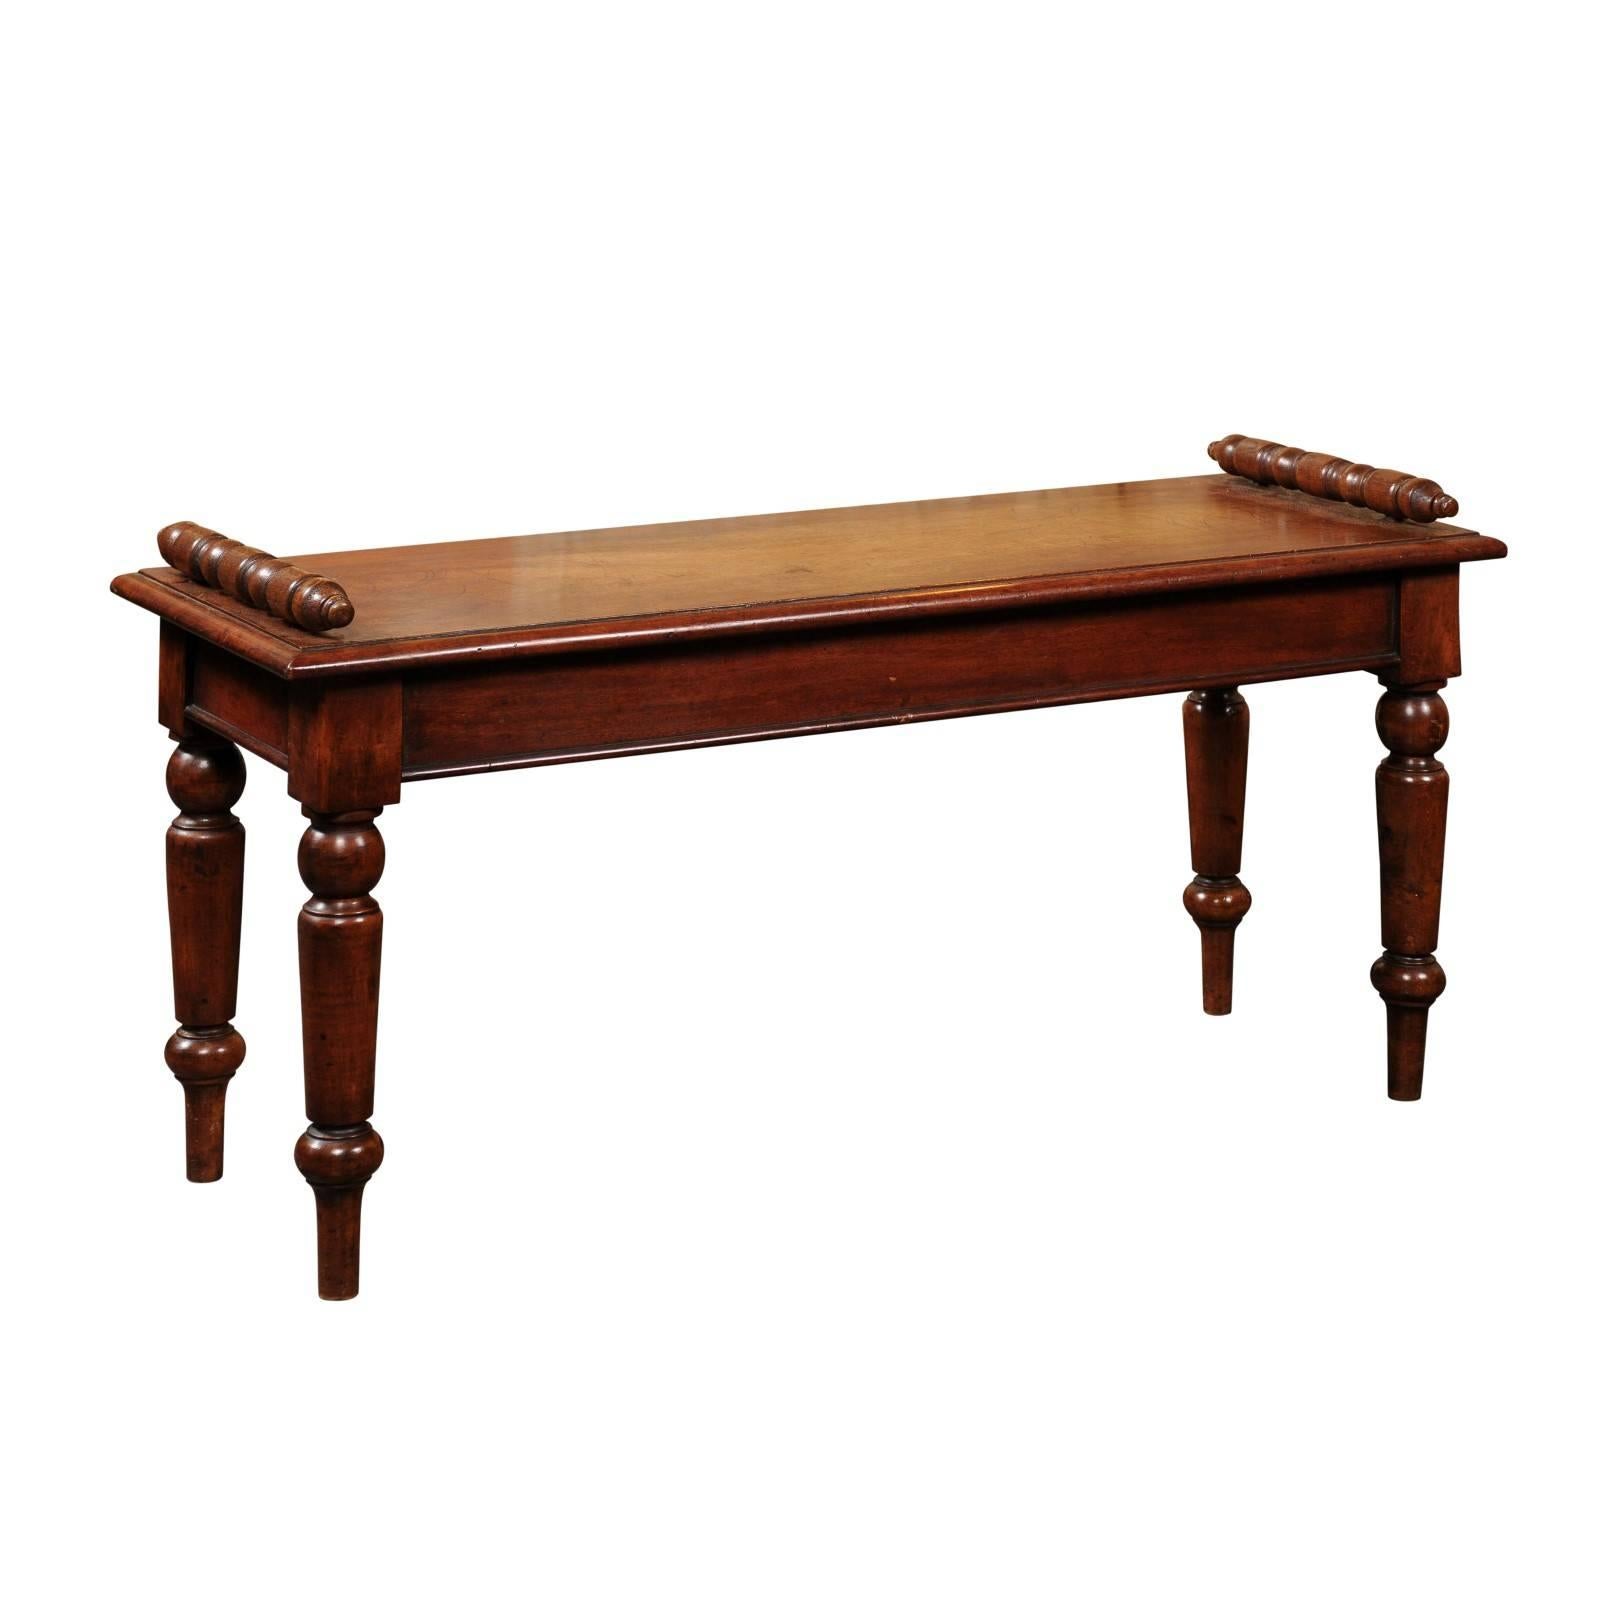 English 1880s Mahogany Hall Bench with Wooden Seat, Turned Arms and Legs